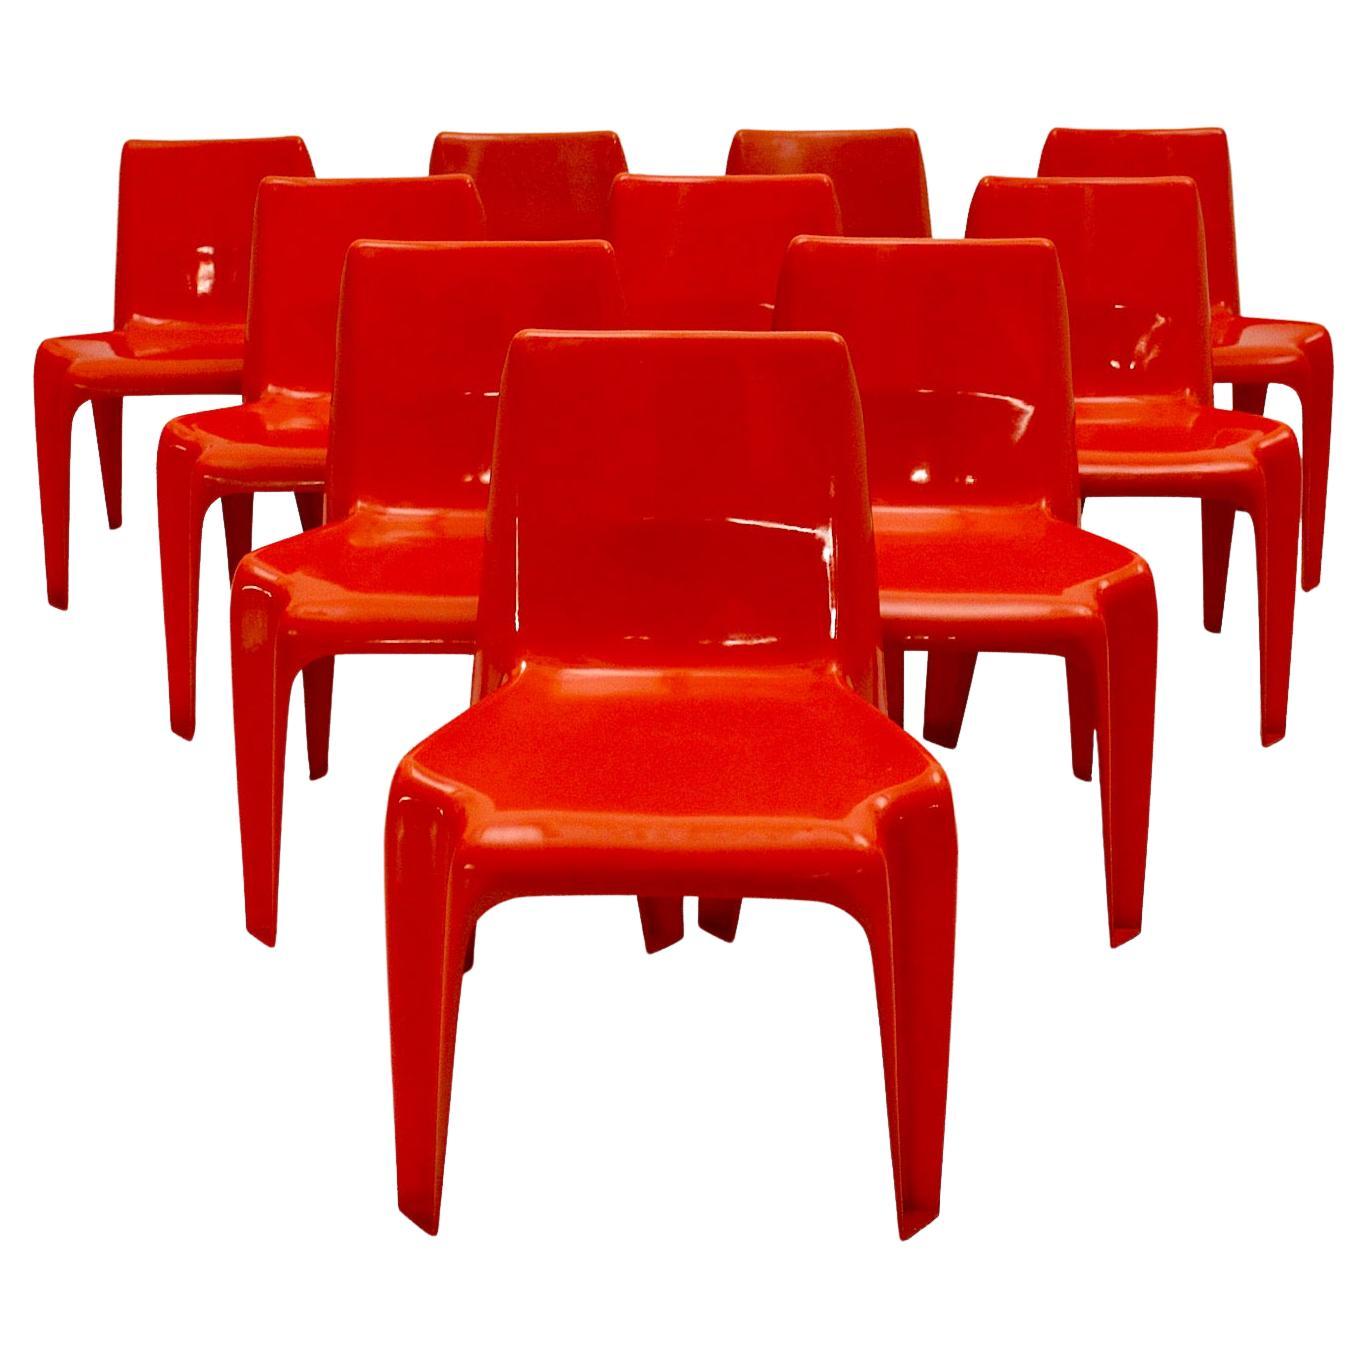 Space Age Vintage Ten Red Plastic Dining Chairs Helmut Baetzner Bofinger, 1964